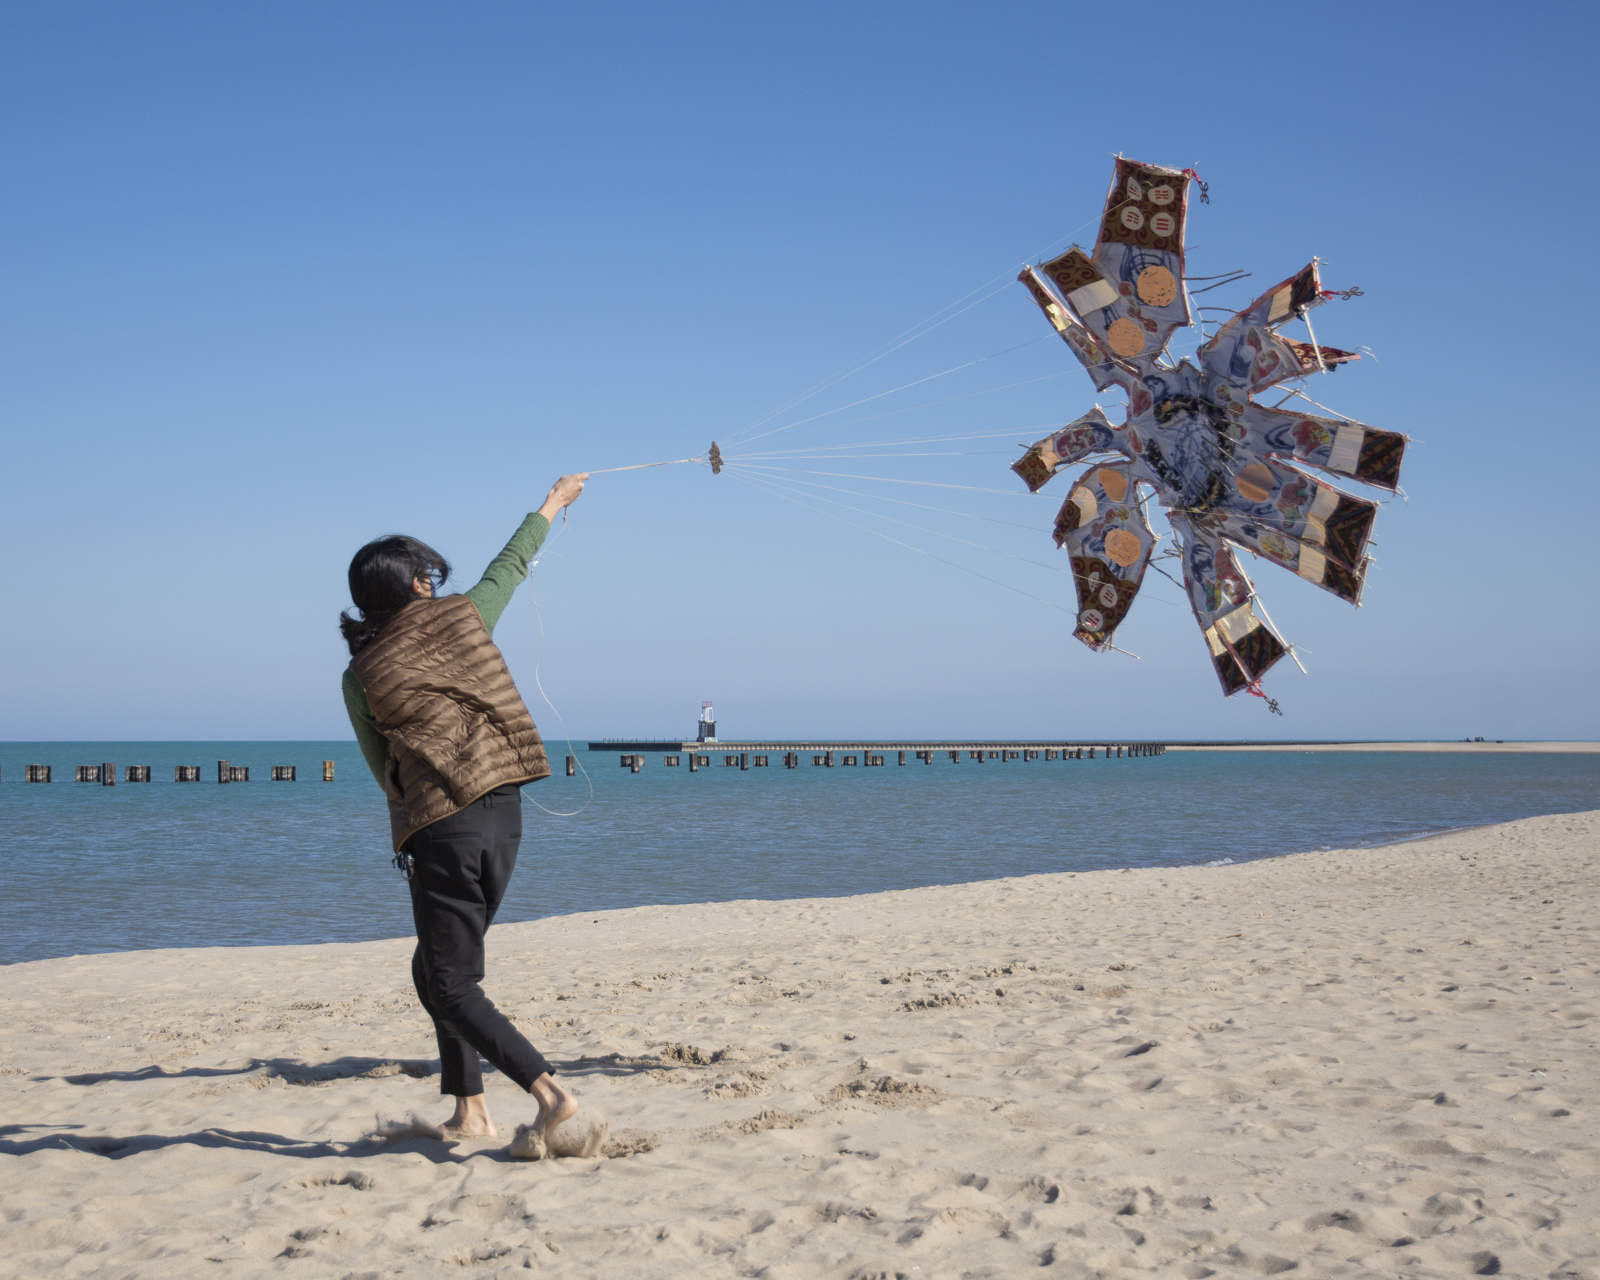 The artist is on a beach flying a kite. The kite does not fly very well.